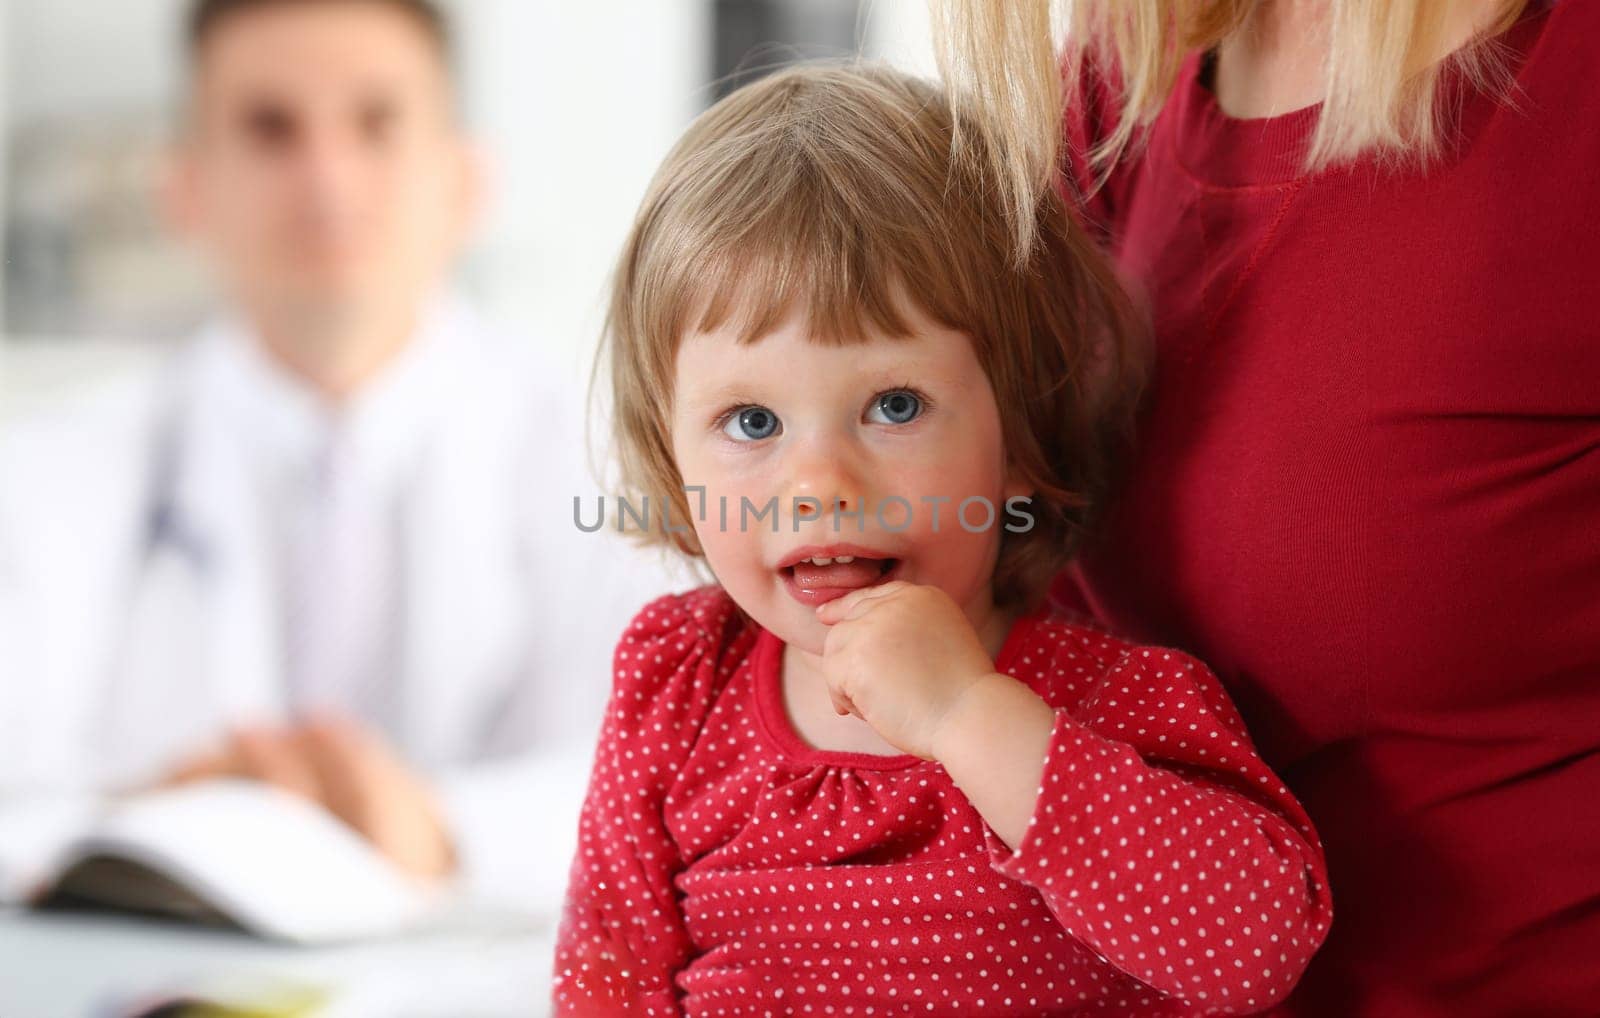 Little child with mother at pediatrician reception. Physical exam, cute infant portrait, baby aid, healthy lifestyle, ward round, child sickness, clinic test, high quality and trust concept